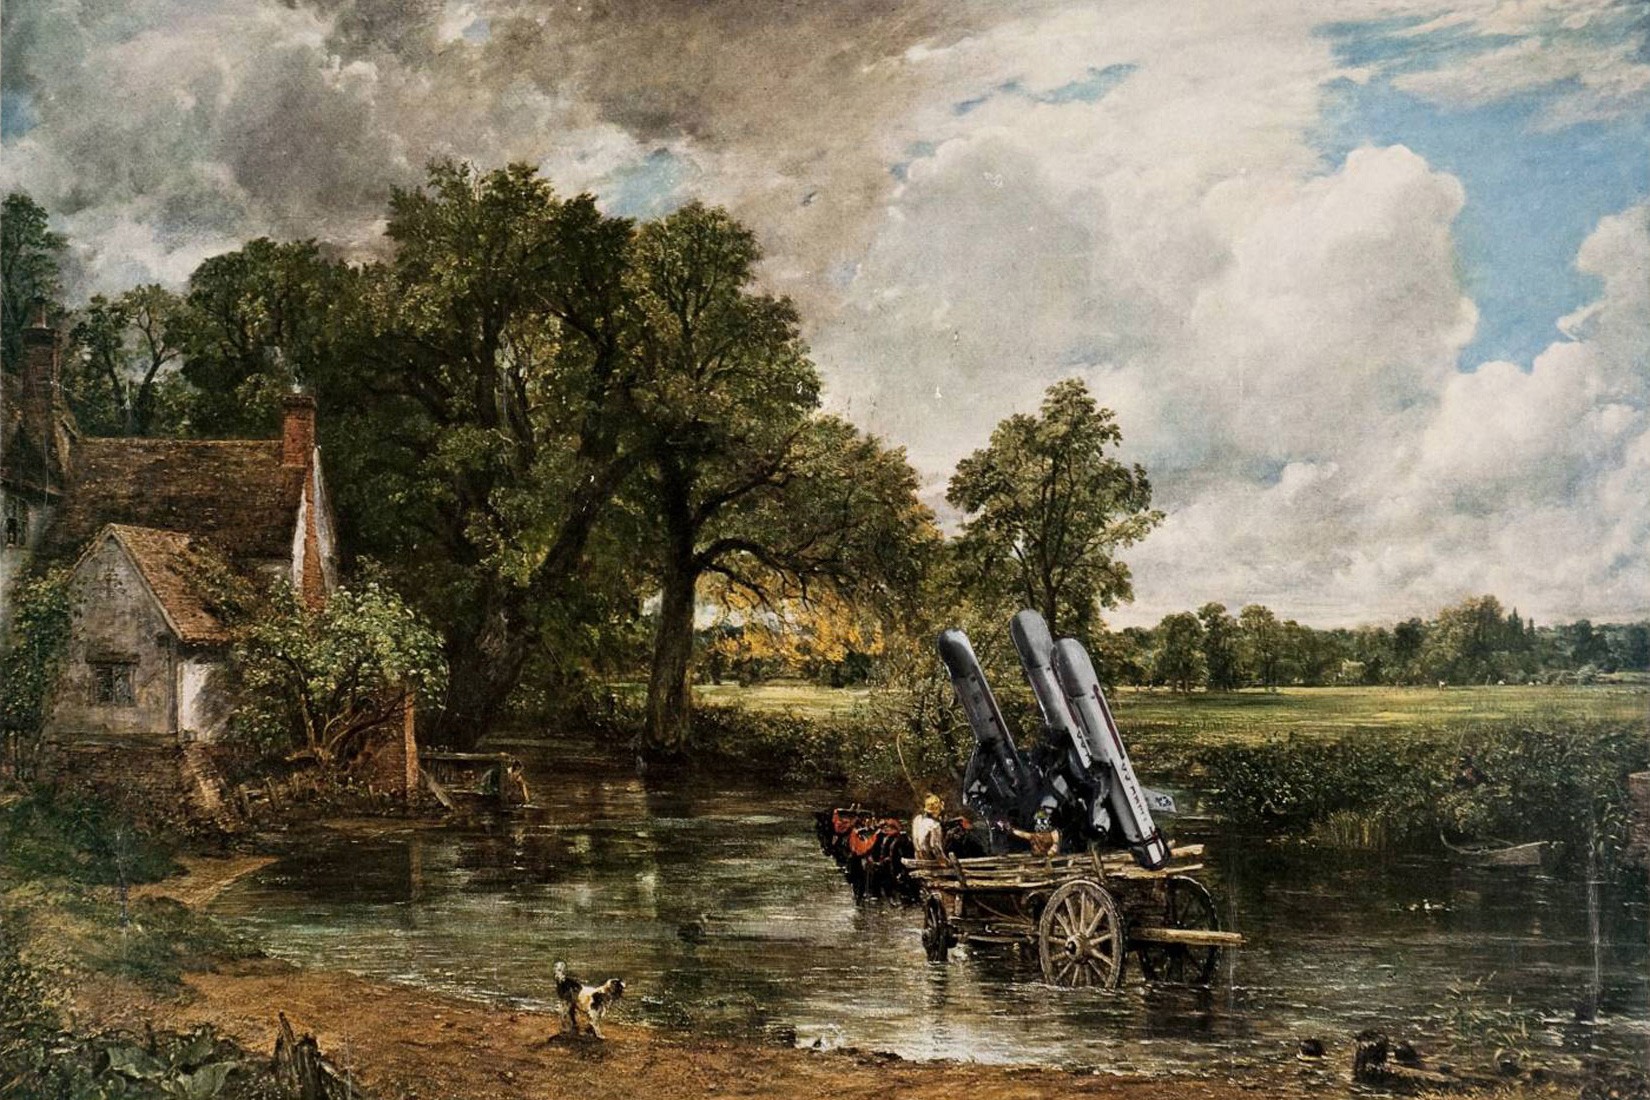 Banksy - Haywain With Cruise Missiles (Hand-Painted Reproduction)